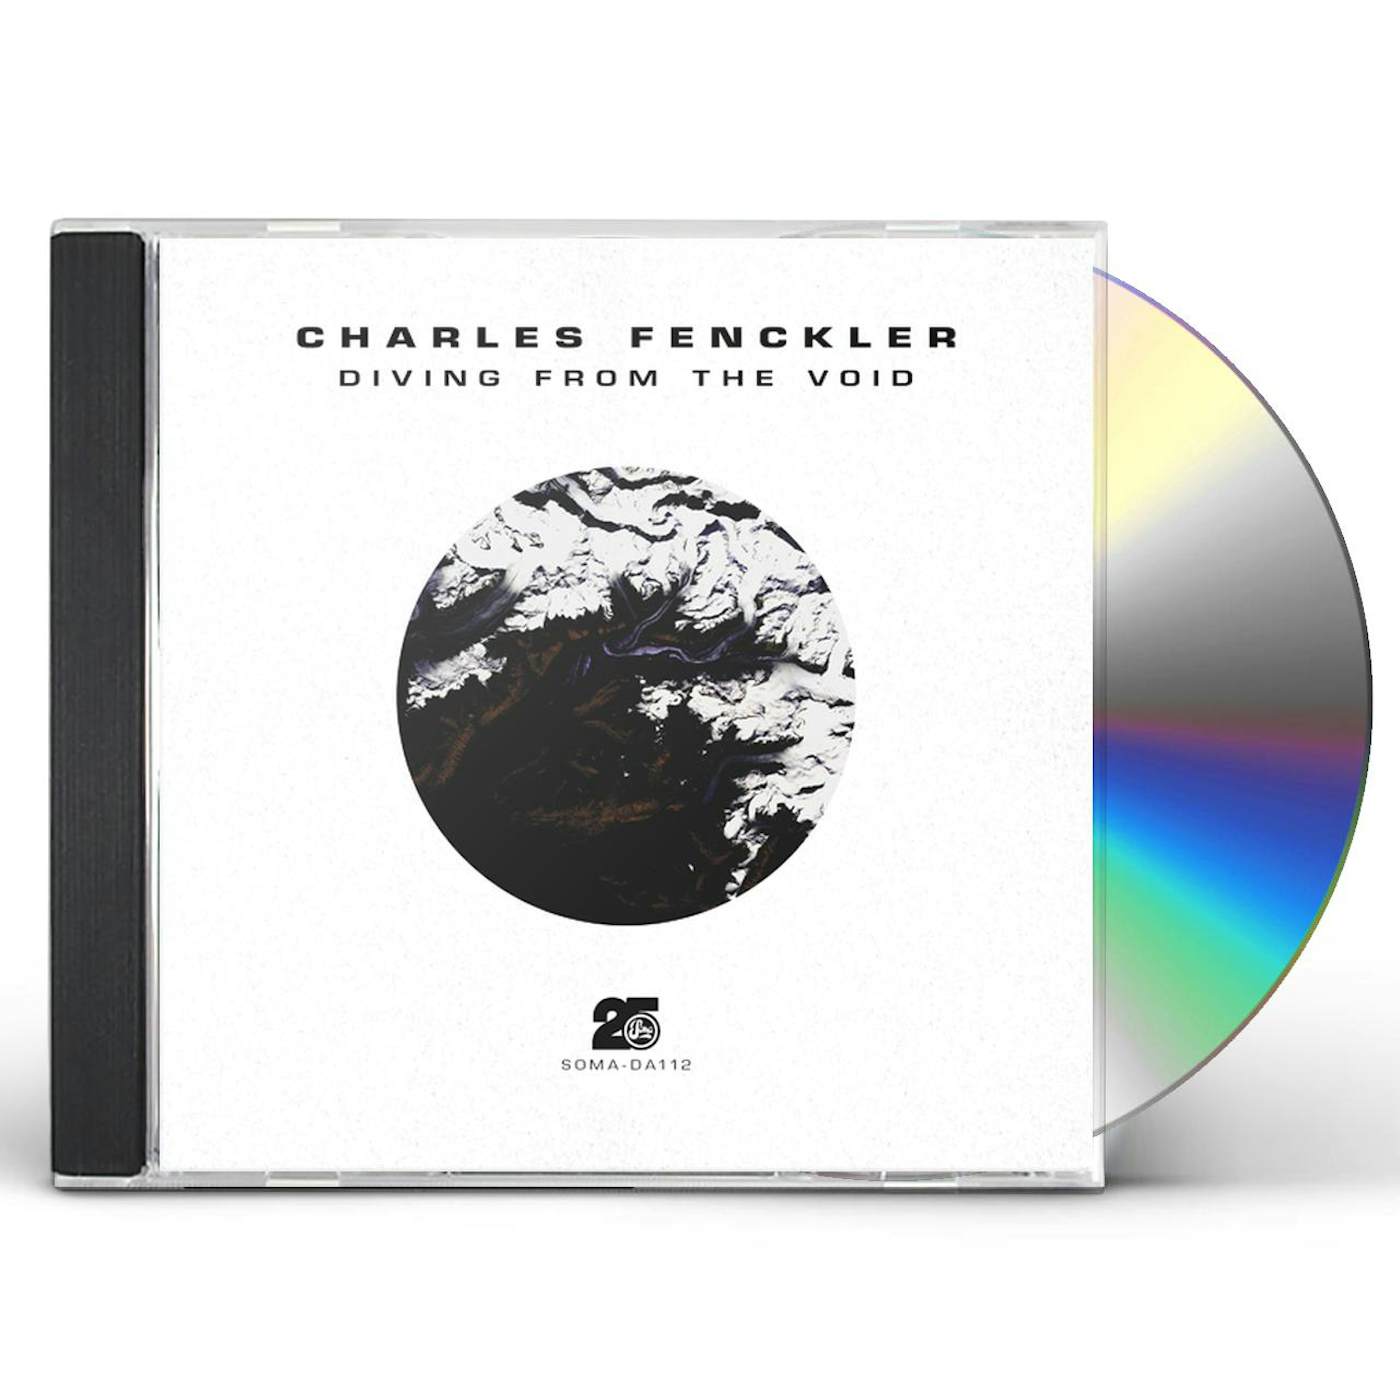 Charles Fenckler DIVING FROM THE VOID CD